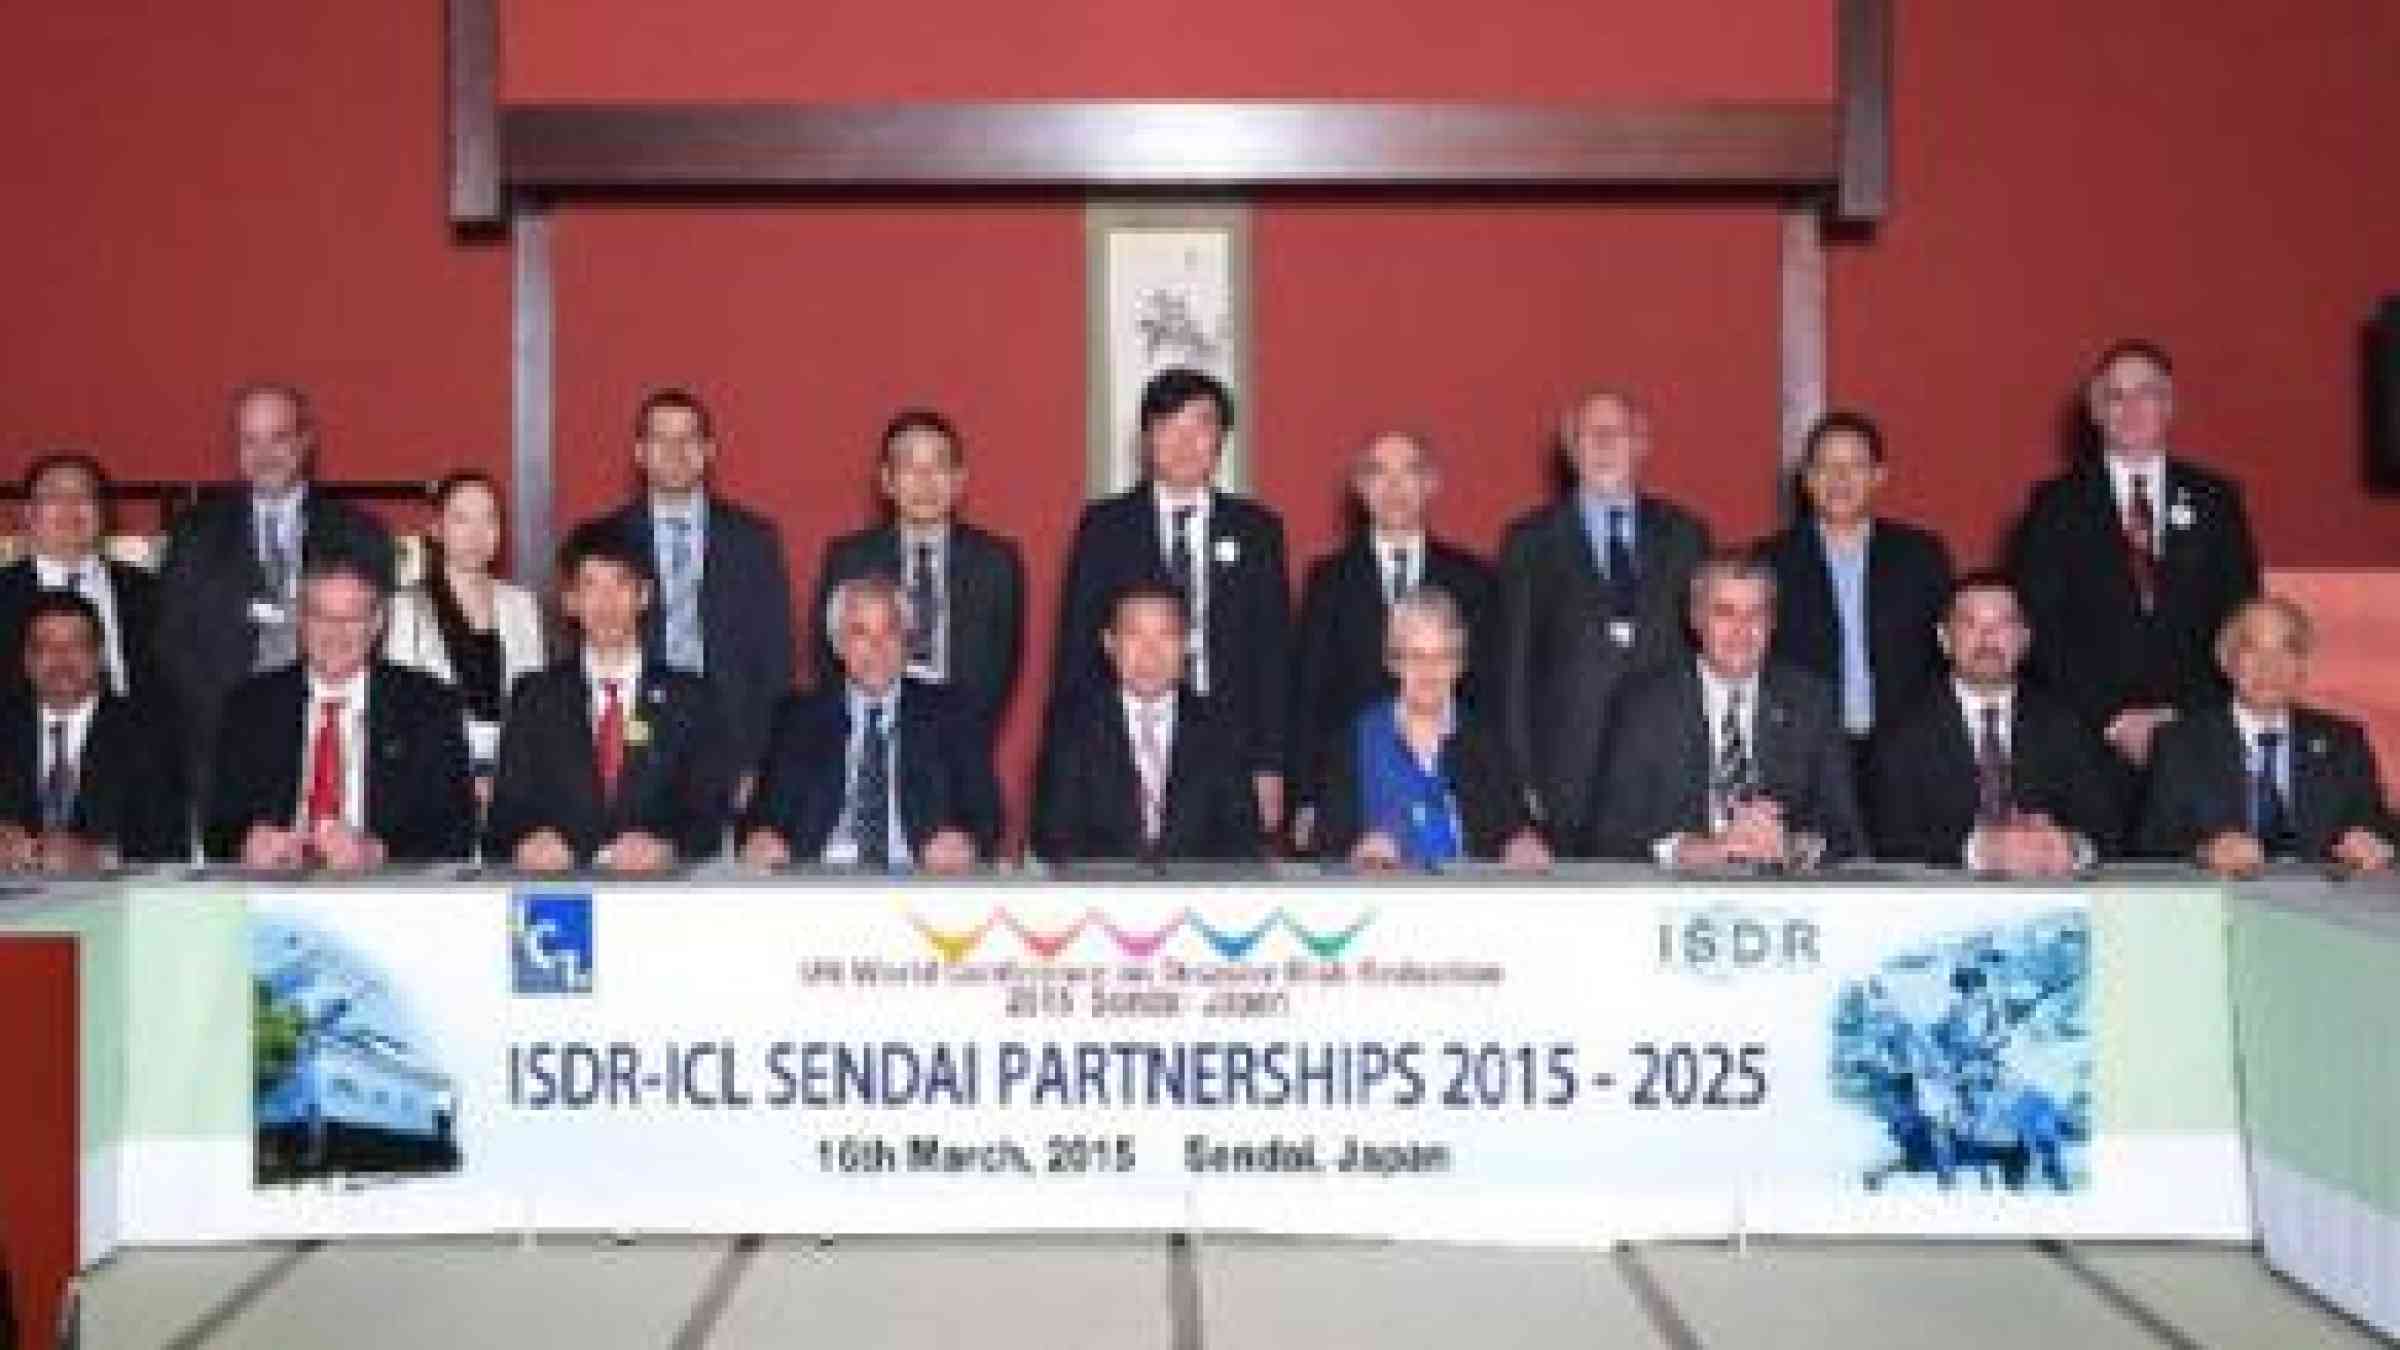 Photo by ICL Signing Ceremony ISDR-ICL Sendai Partnerships 2015-2025 For Global Promotion of Understanding and Reducing Landslide Disaster Risk on 16 March 2015, Junsen, Sendai, Japan